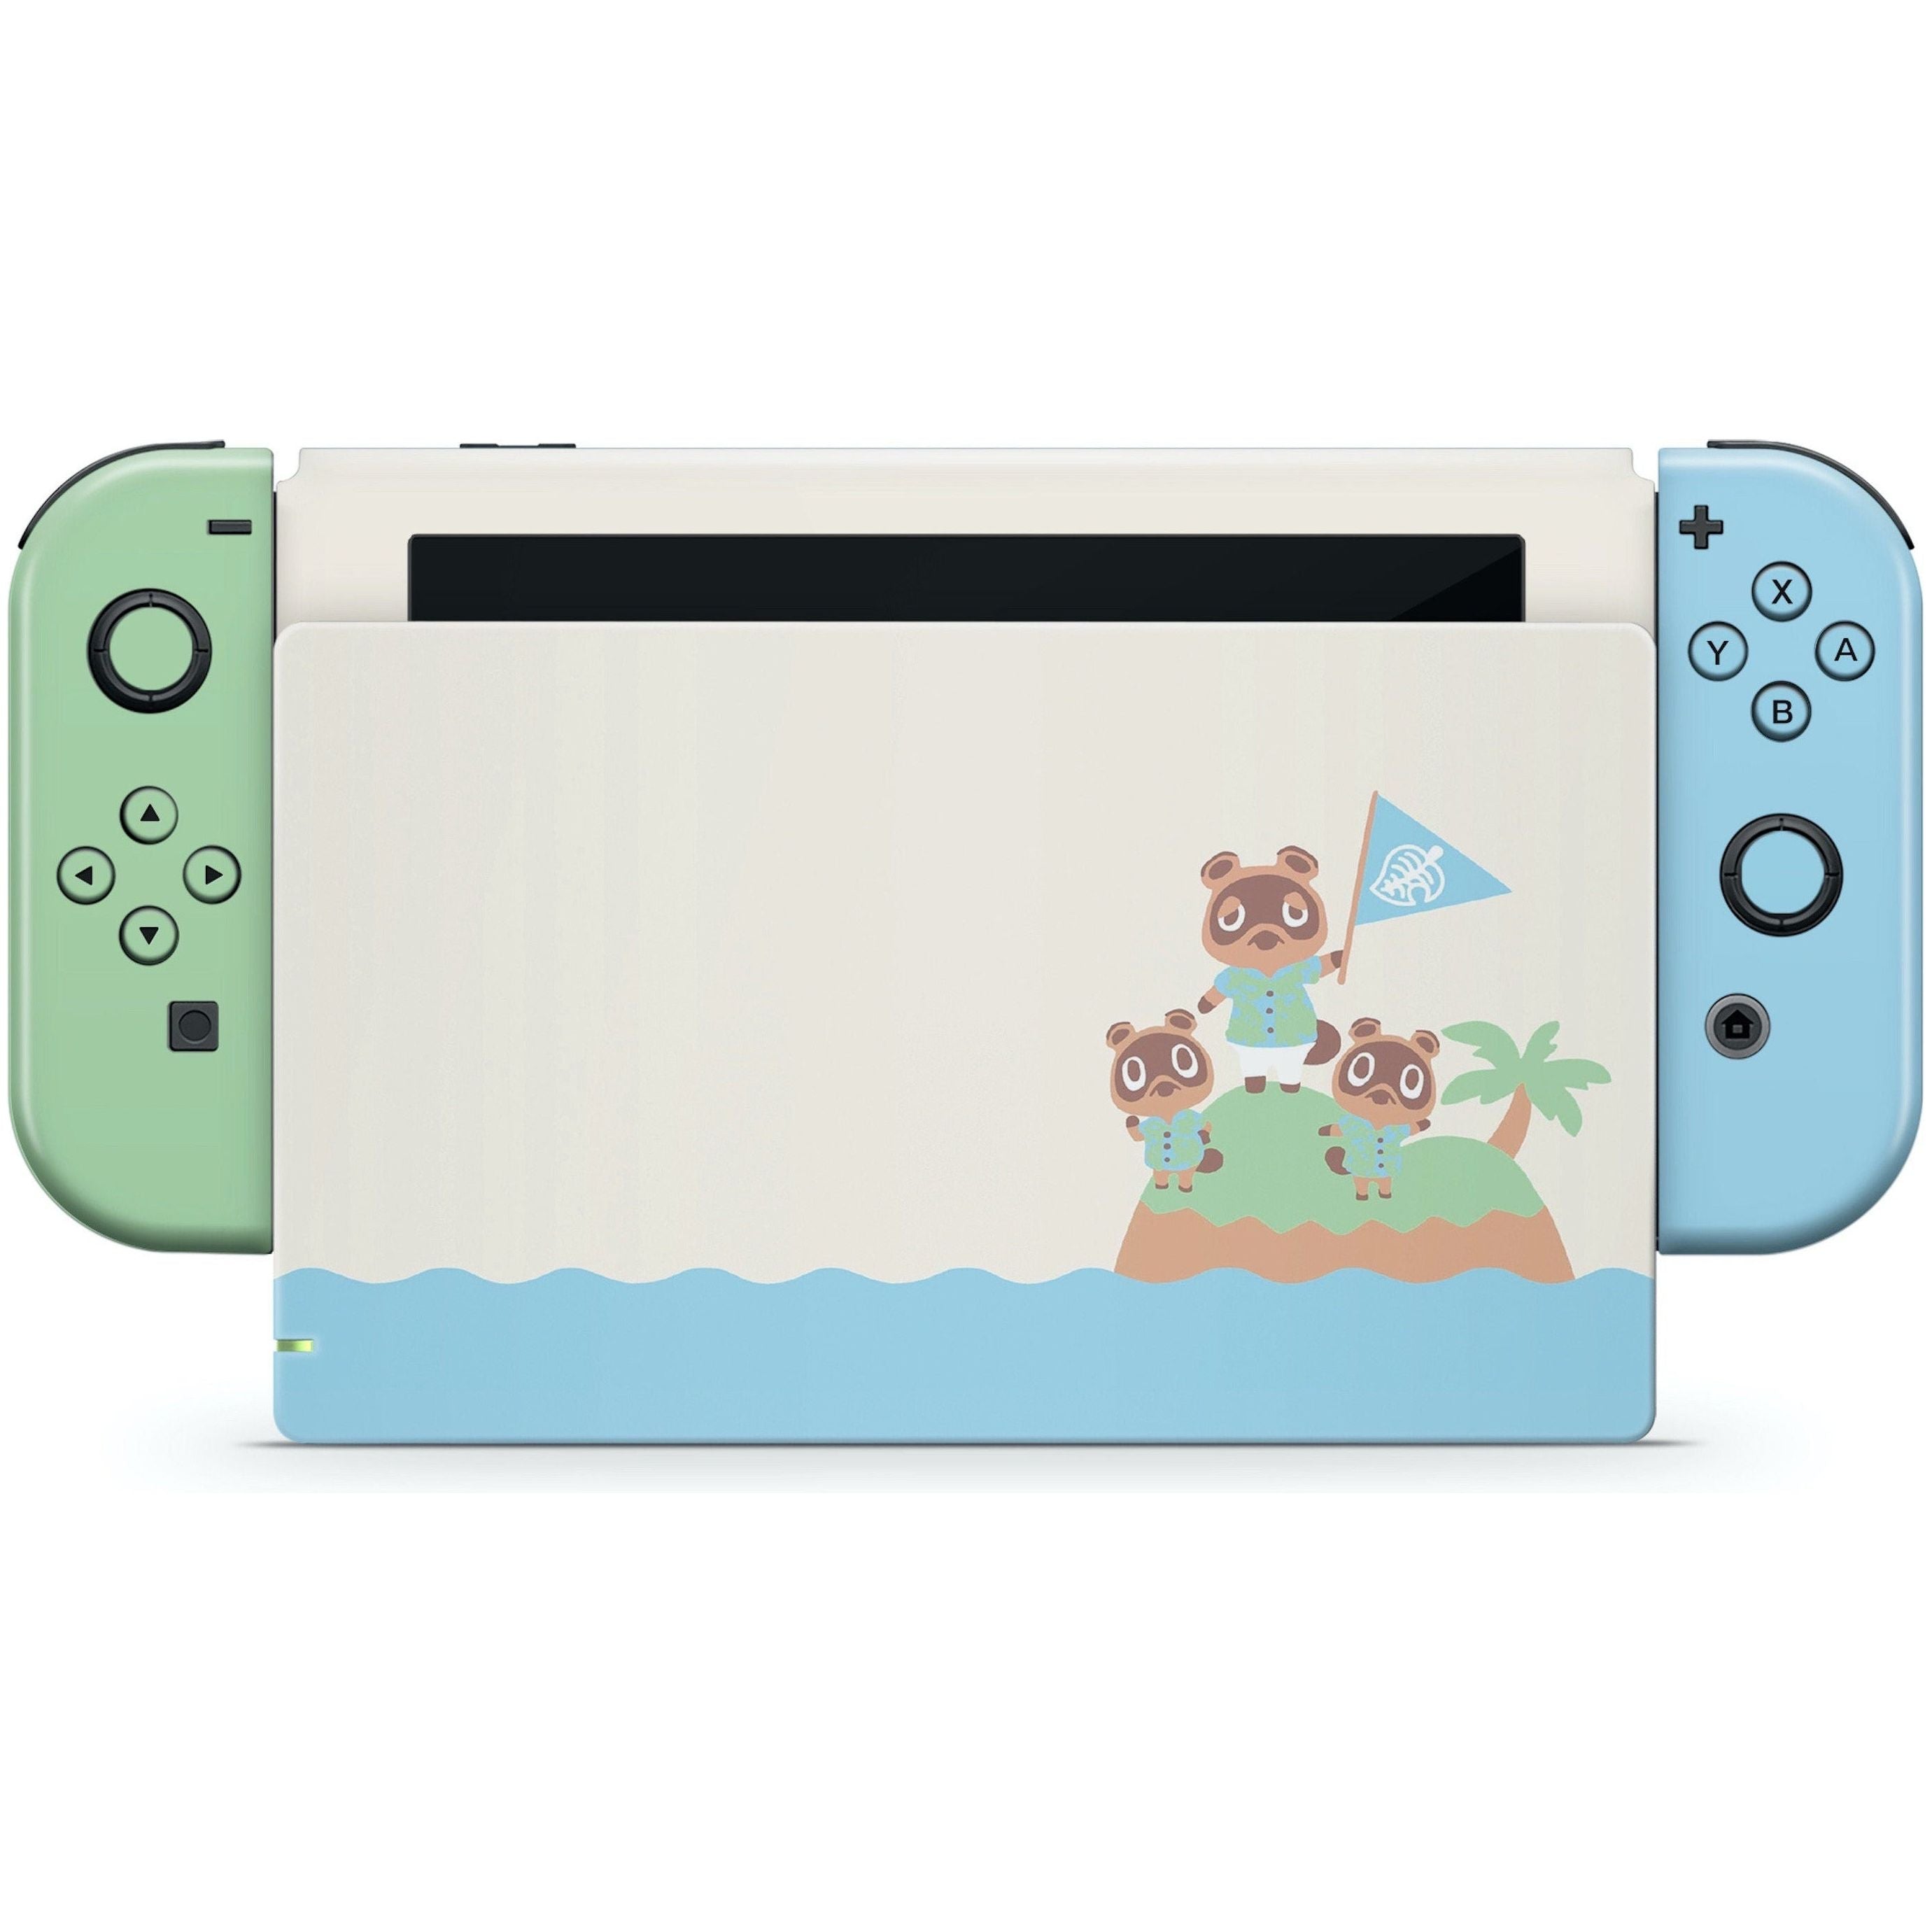 Nintendo Switch System - Animal Crossing New Horizons Special Edition (Reduced)